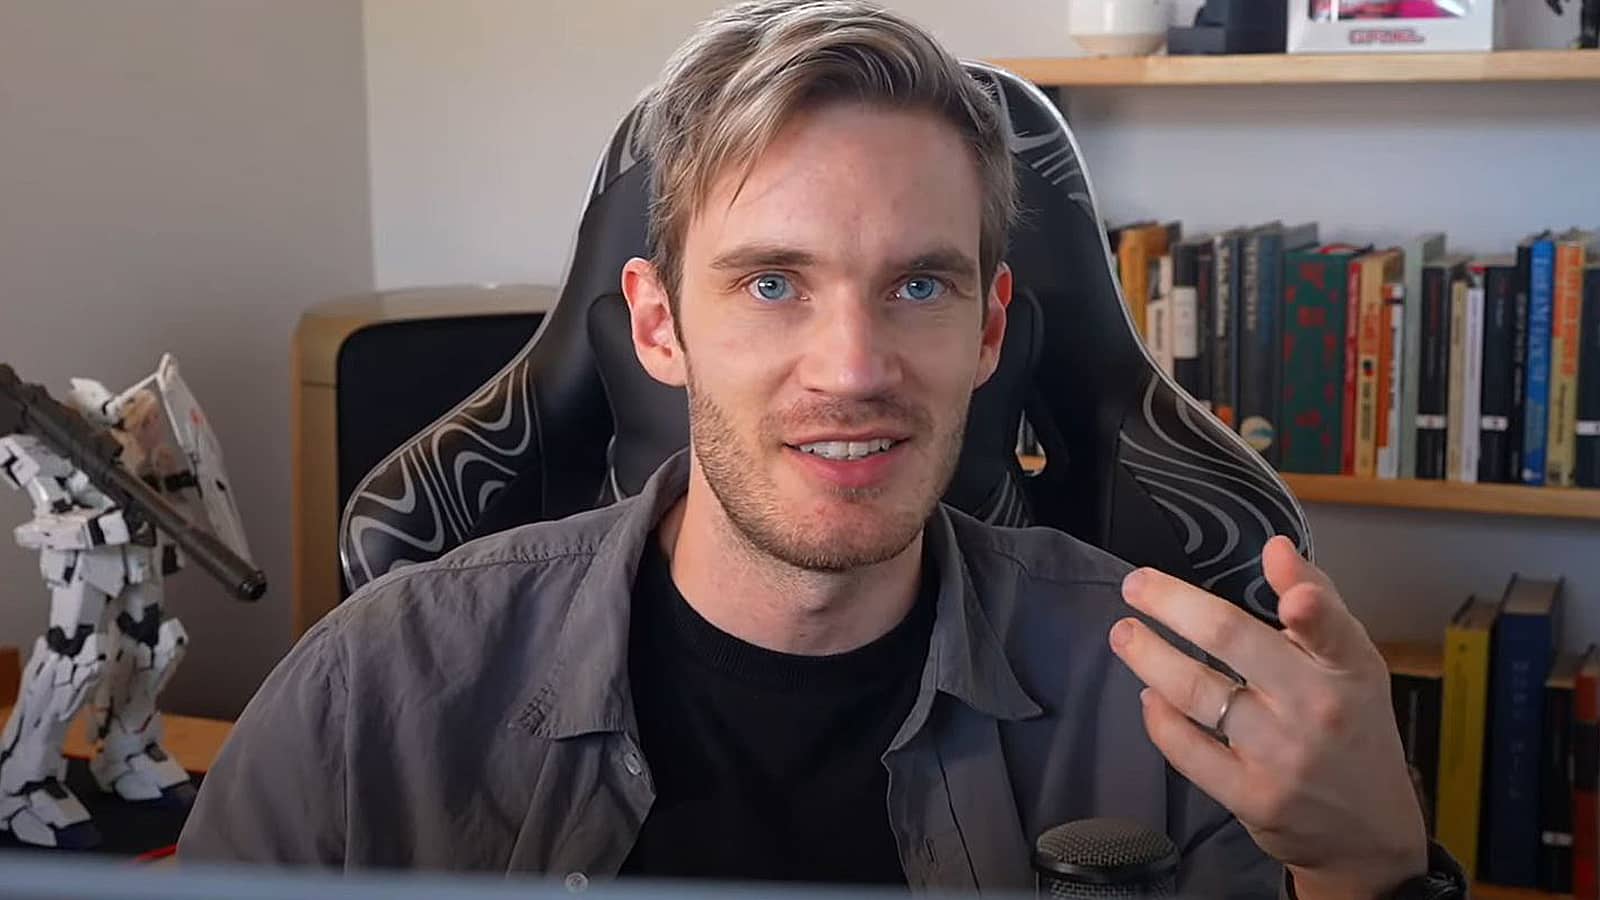 pewdiepie reveals biggest benefit to living in japan as an influencer